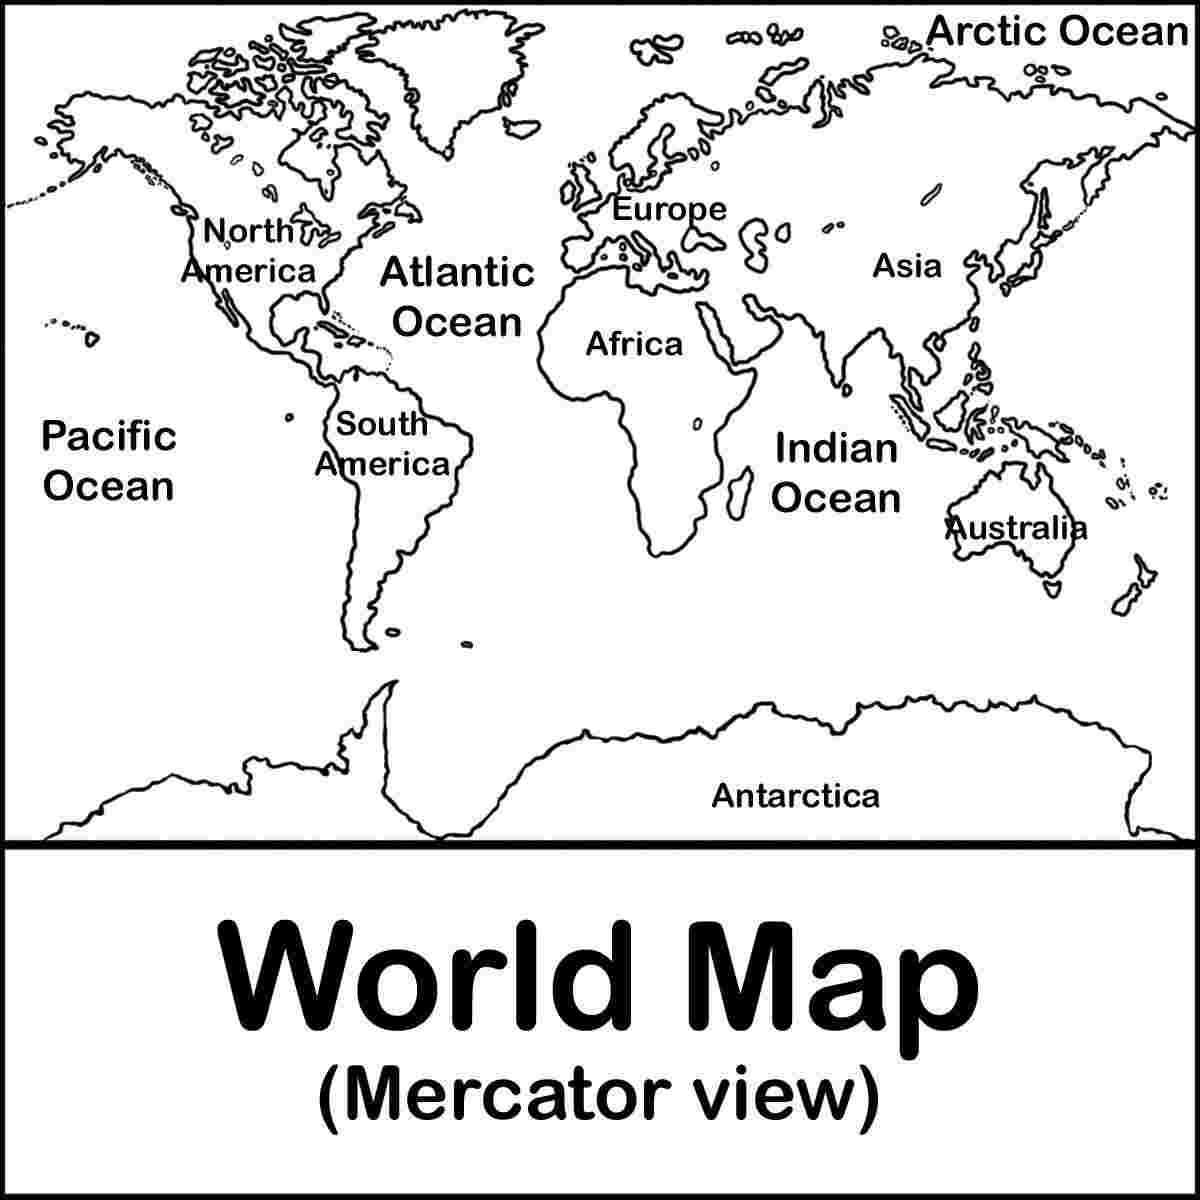 Mercator Projection of The World